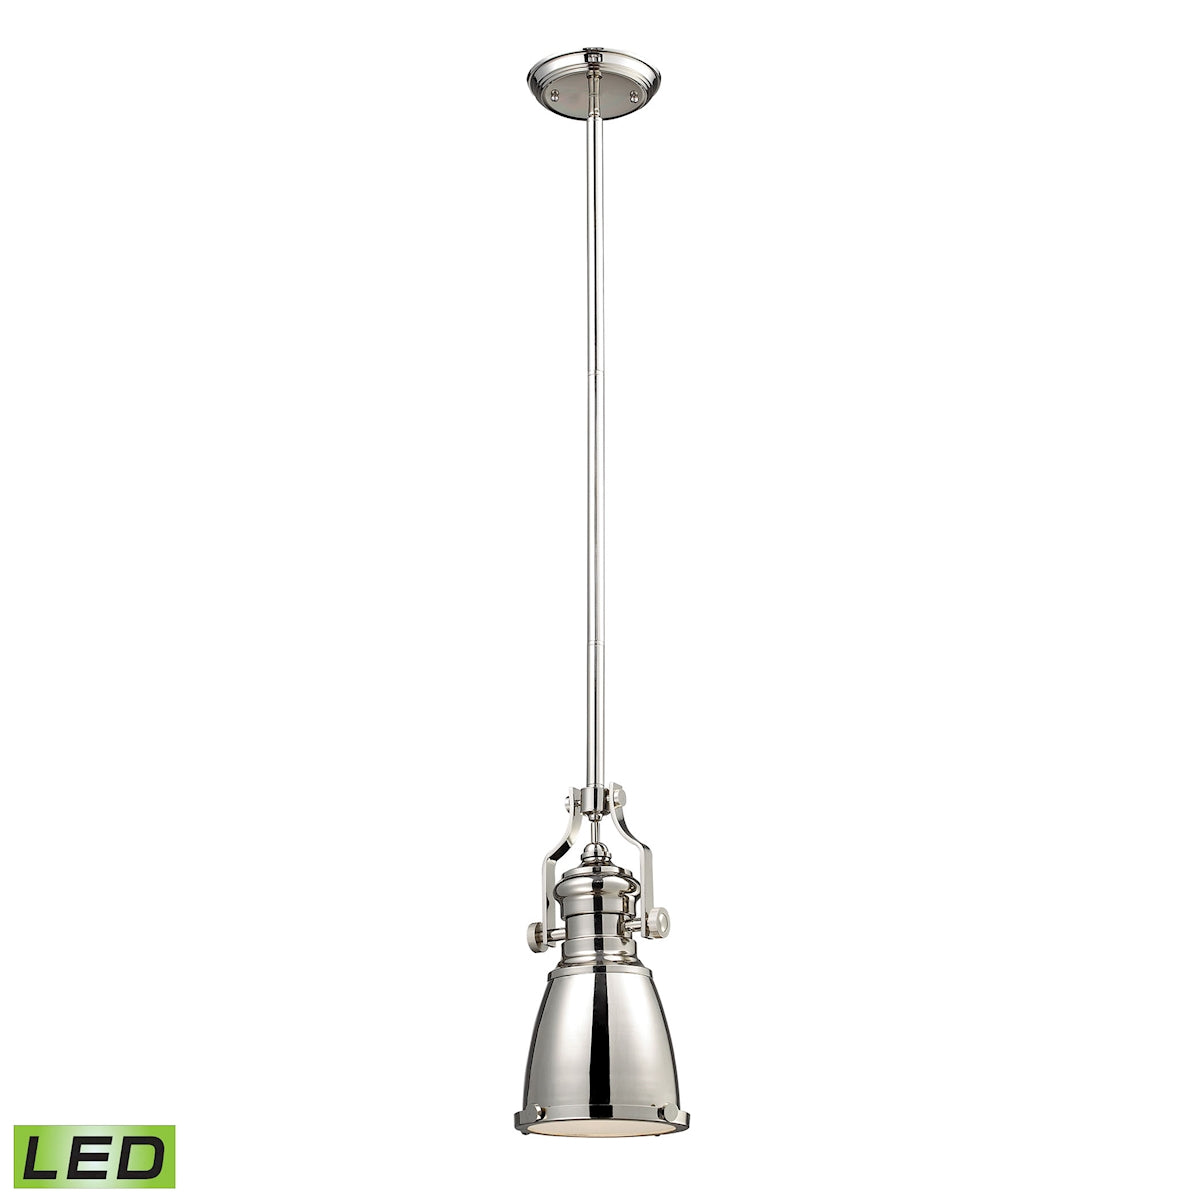 ELK Lighting 66159-1-LED Chadwick 1-Light Mini Pendant in Polished Nickel with Matching Shade - Includes LED Bulb